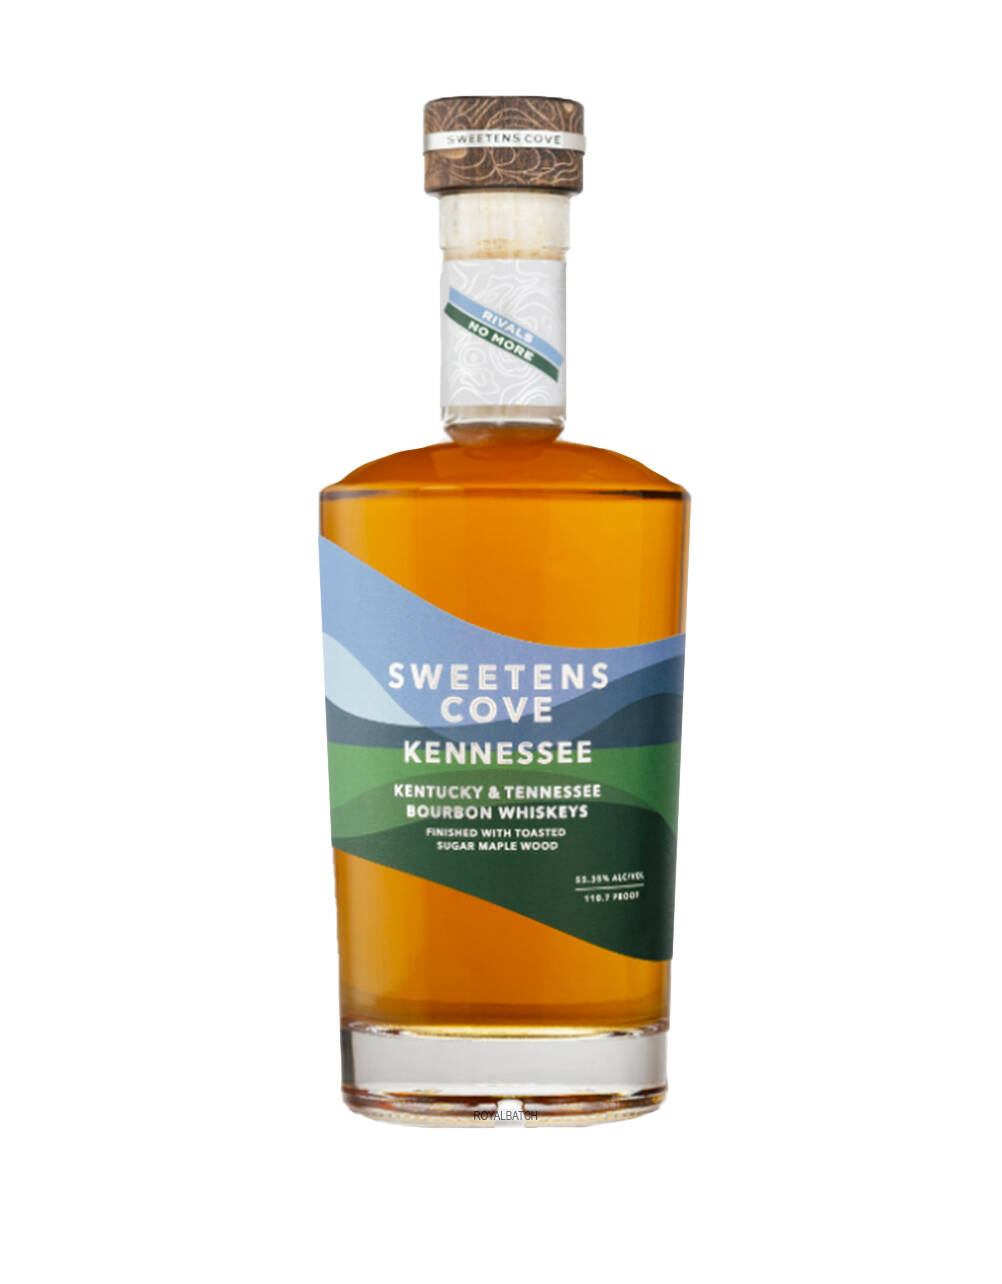 Sweetens Cove Kennessee Bourbon Whiskey